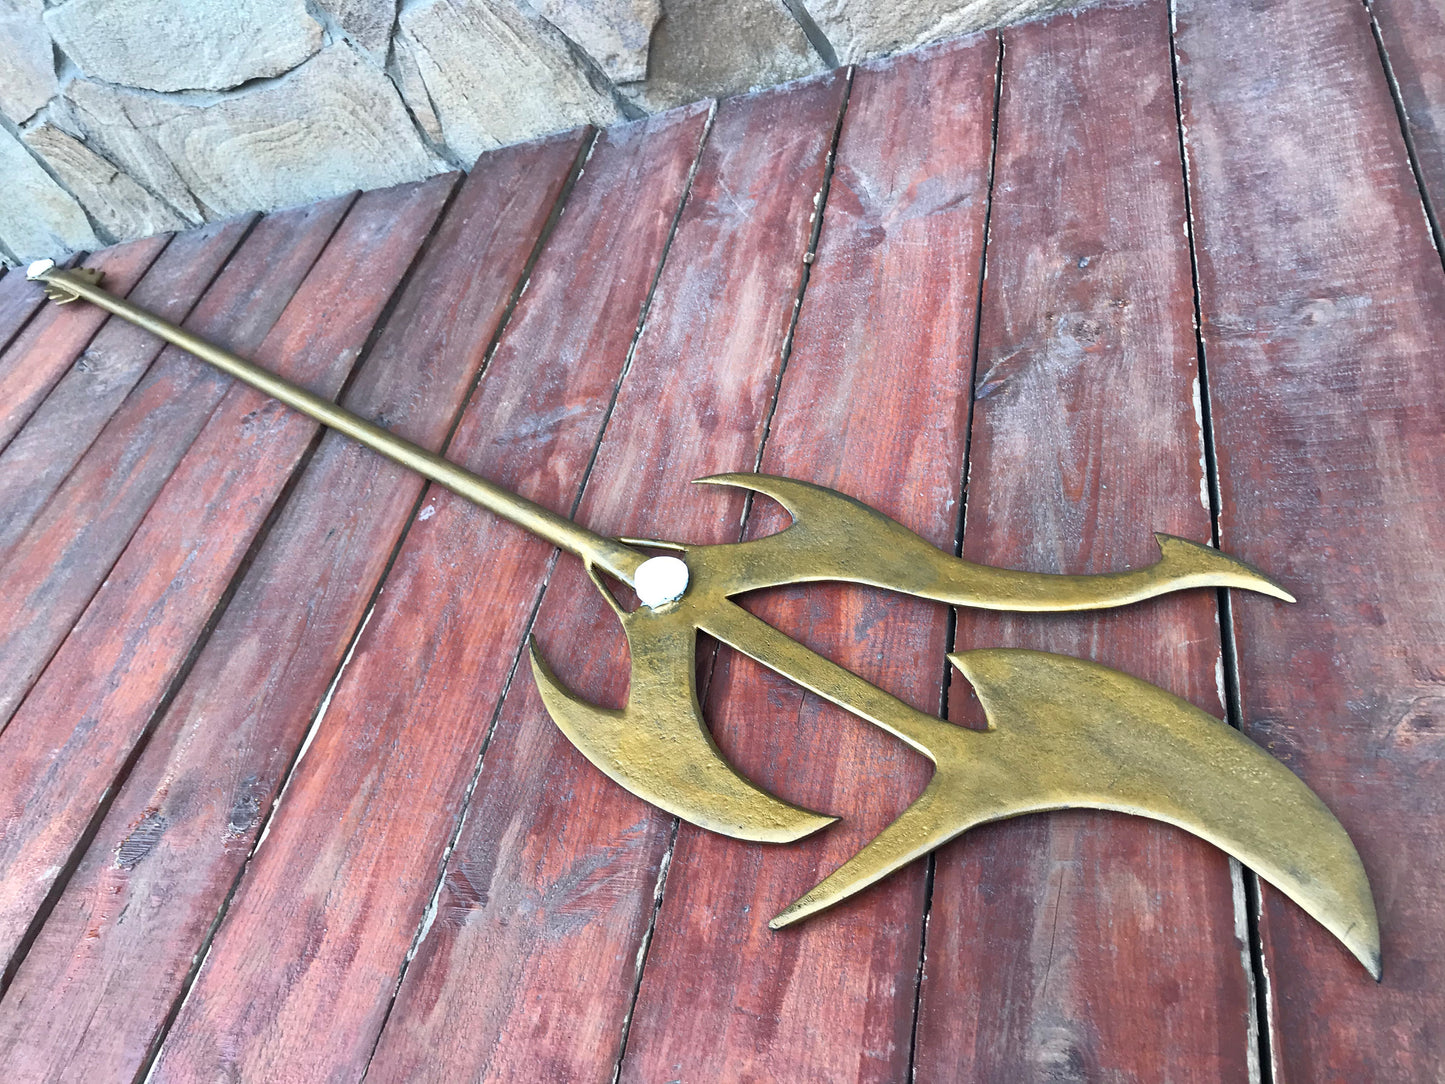 Mera trident, comics, cosplay trident, trident, cosplay weapon, cosplay armor, Aquaman, ocean gift, sea gift, iron gift, 6th anniversary,axe